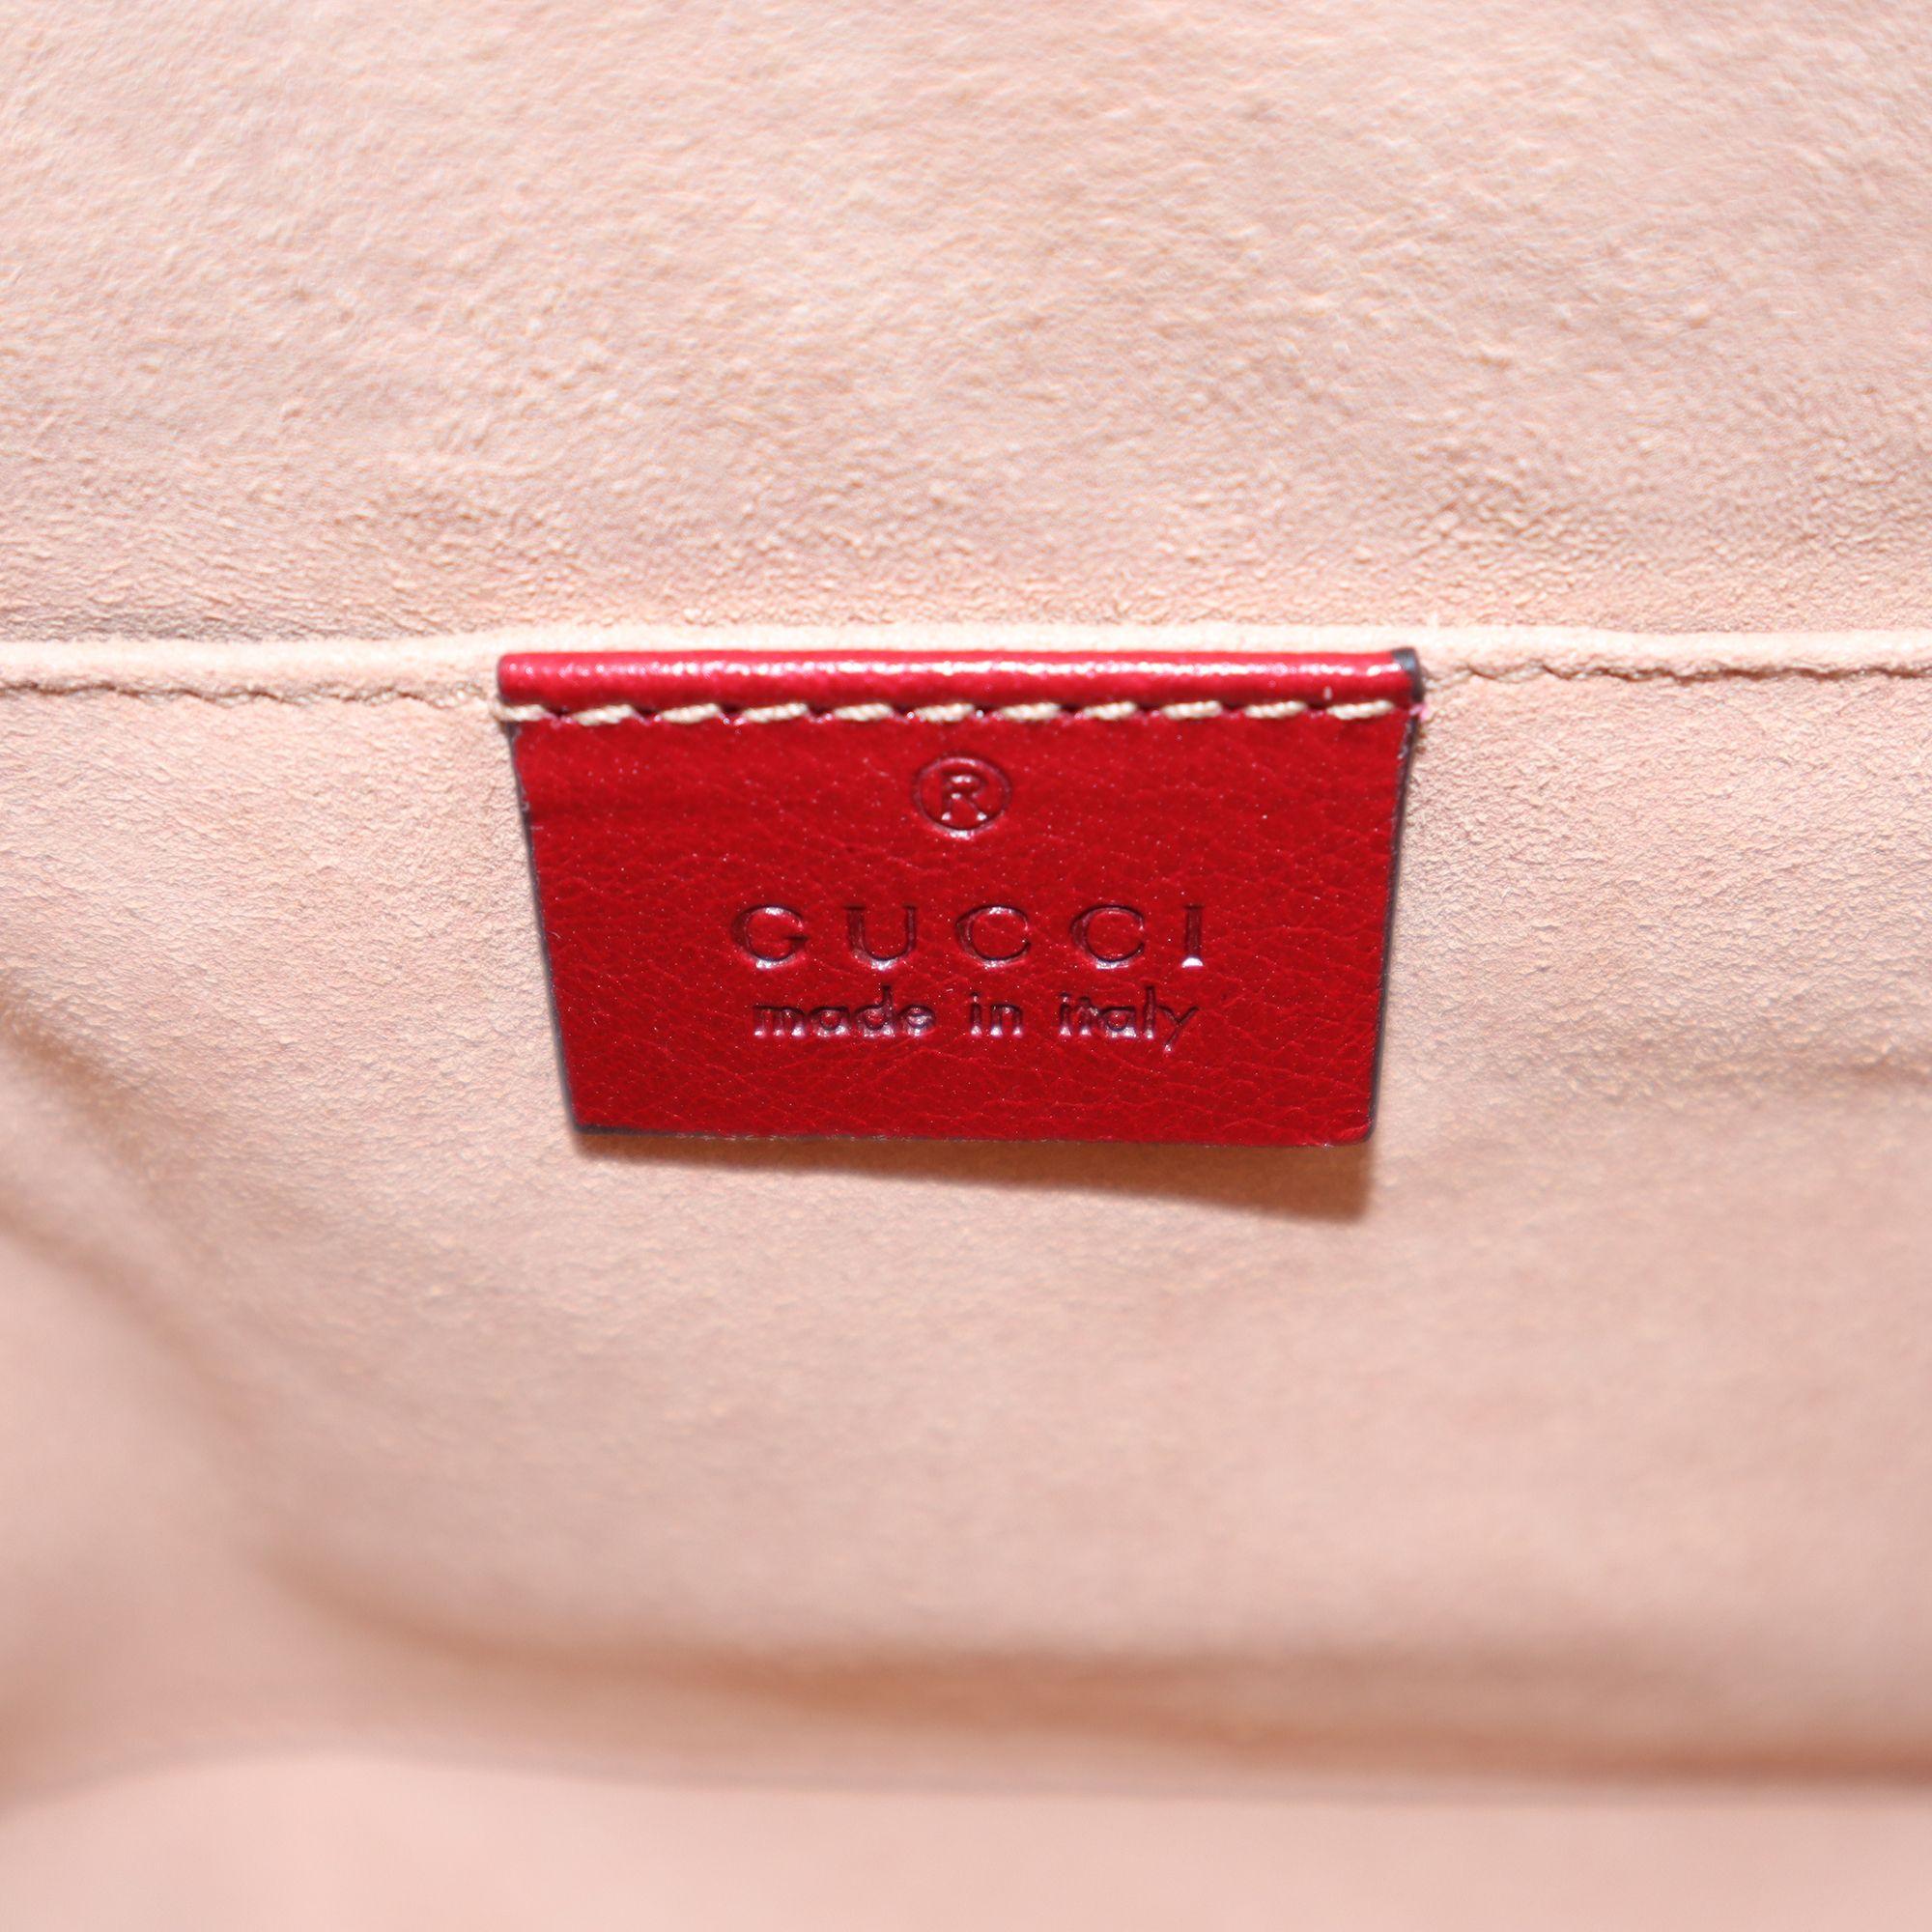 Gucci Ophidia Small Blue and Red Suede Shoulder Bag 499621 2